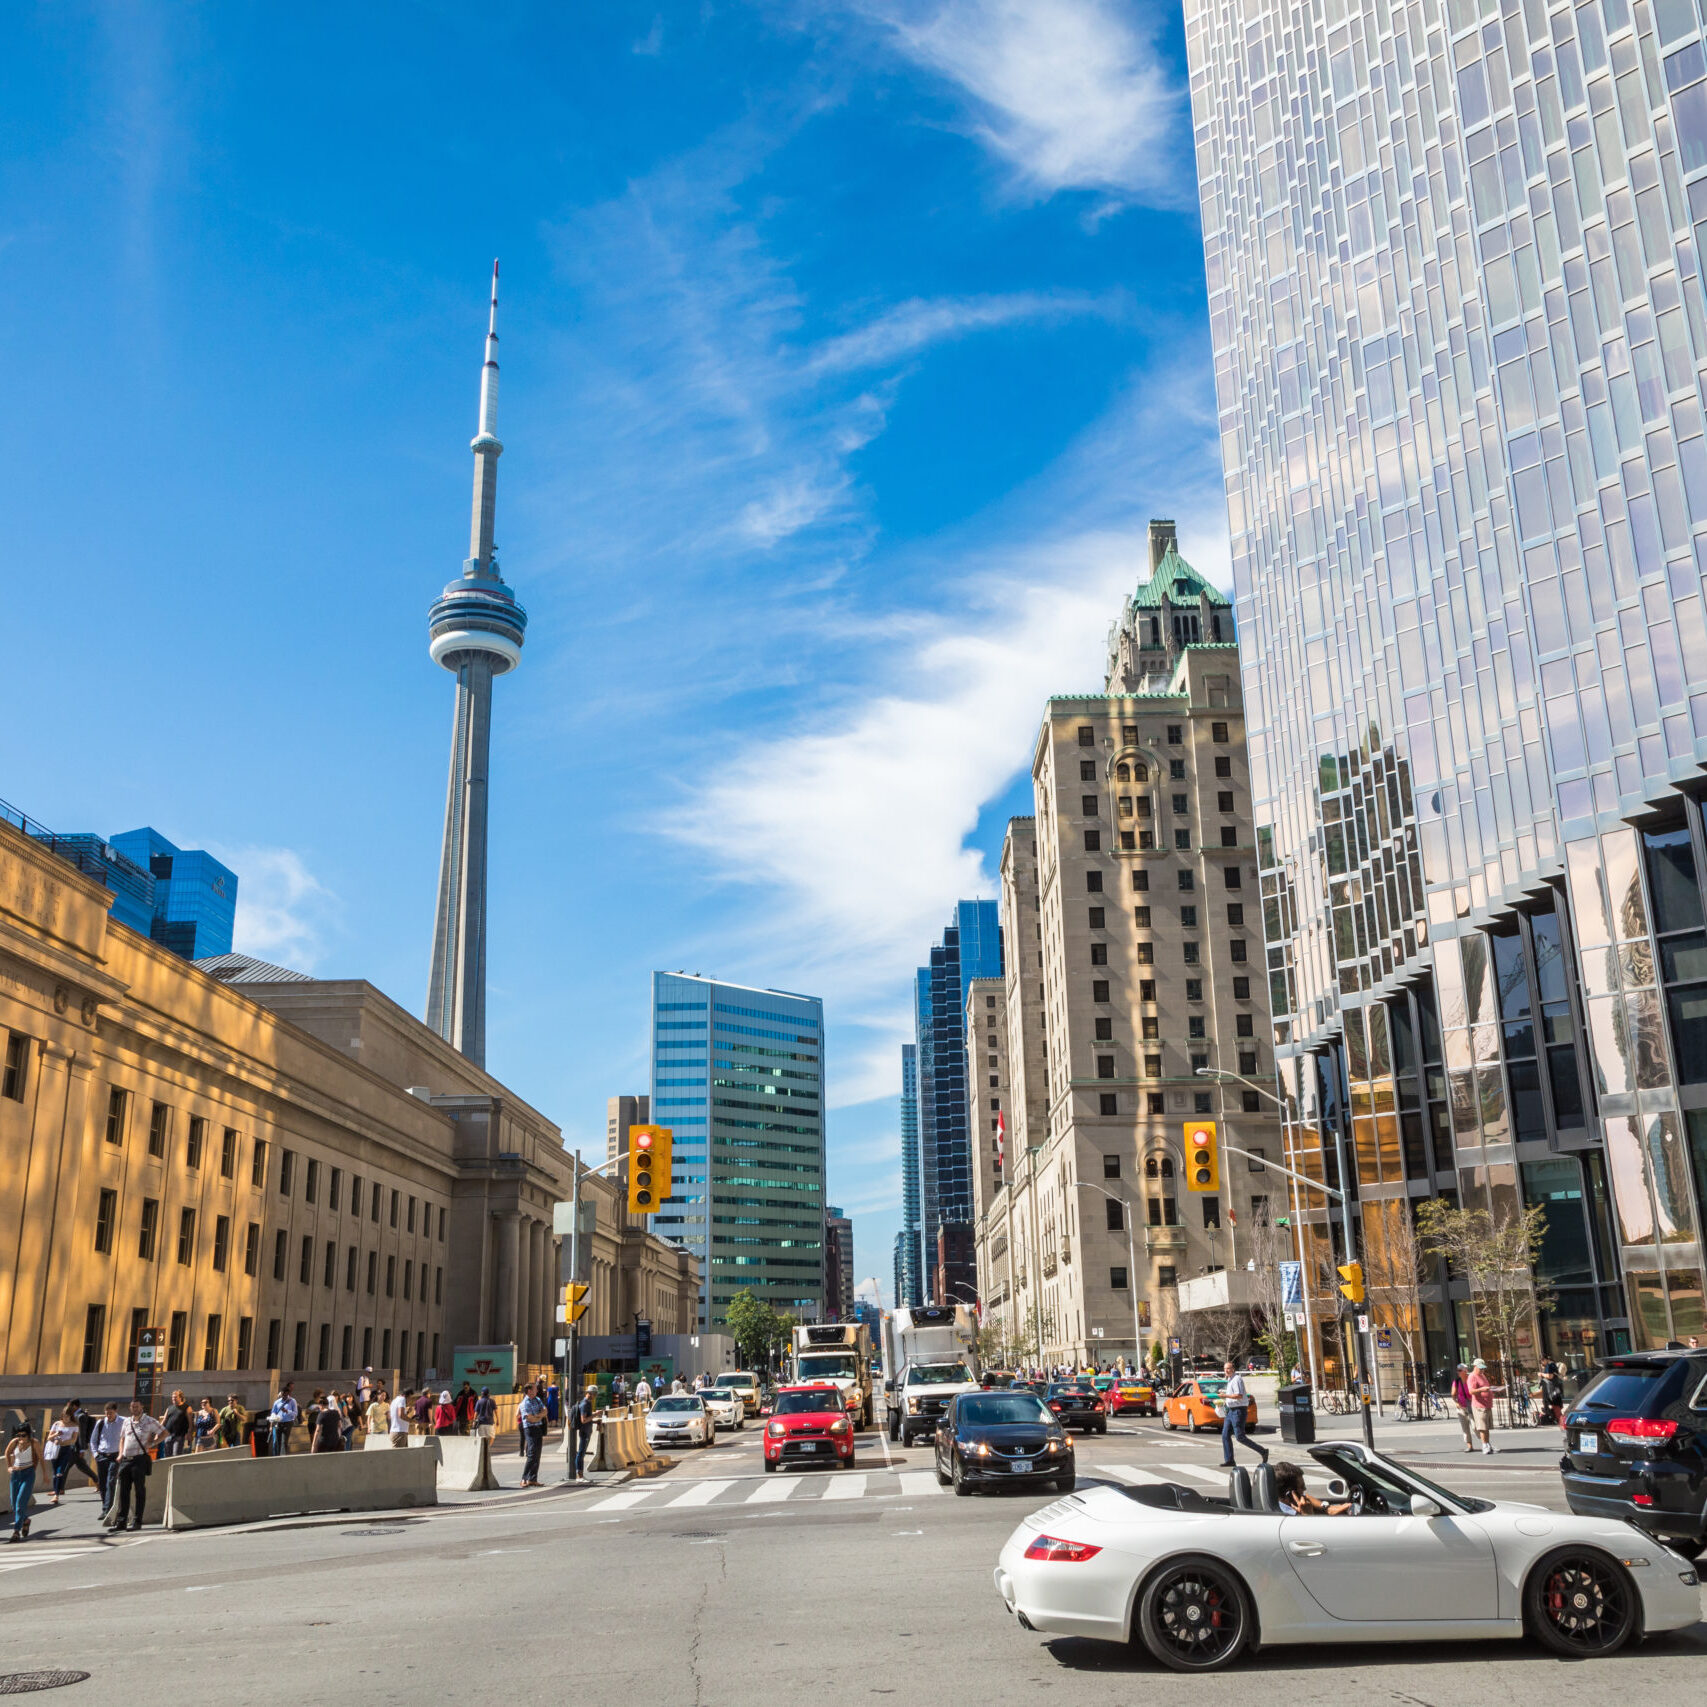 TORONTO, CANADA - SEPTEMBER 17, 2018: Rush hour atToronto's busiest intersections. Financial district at the background.